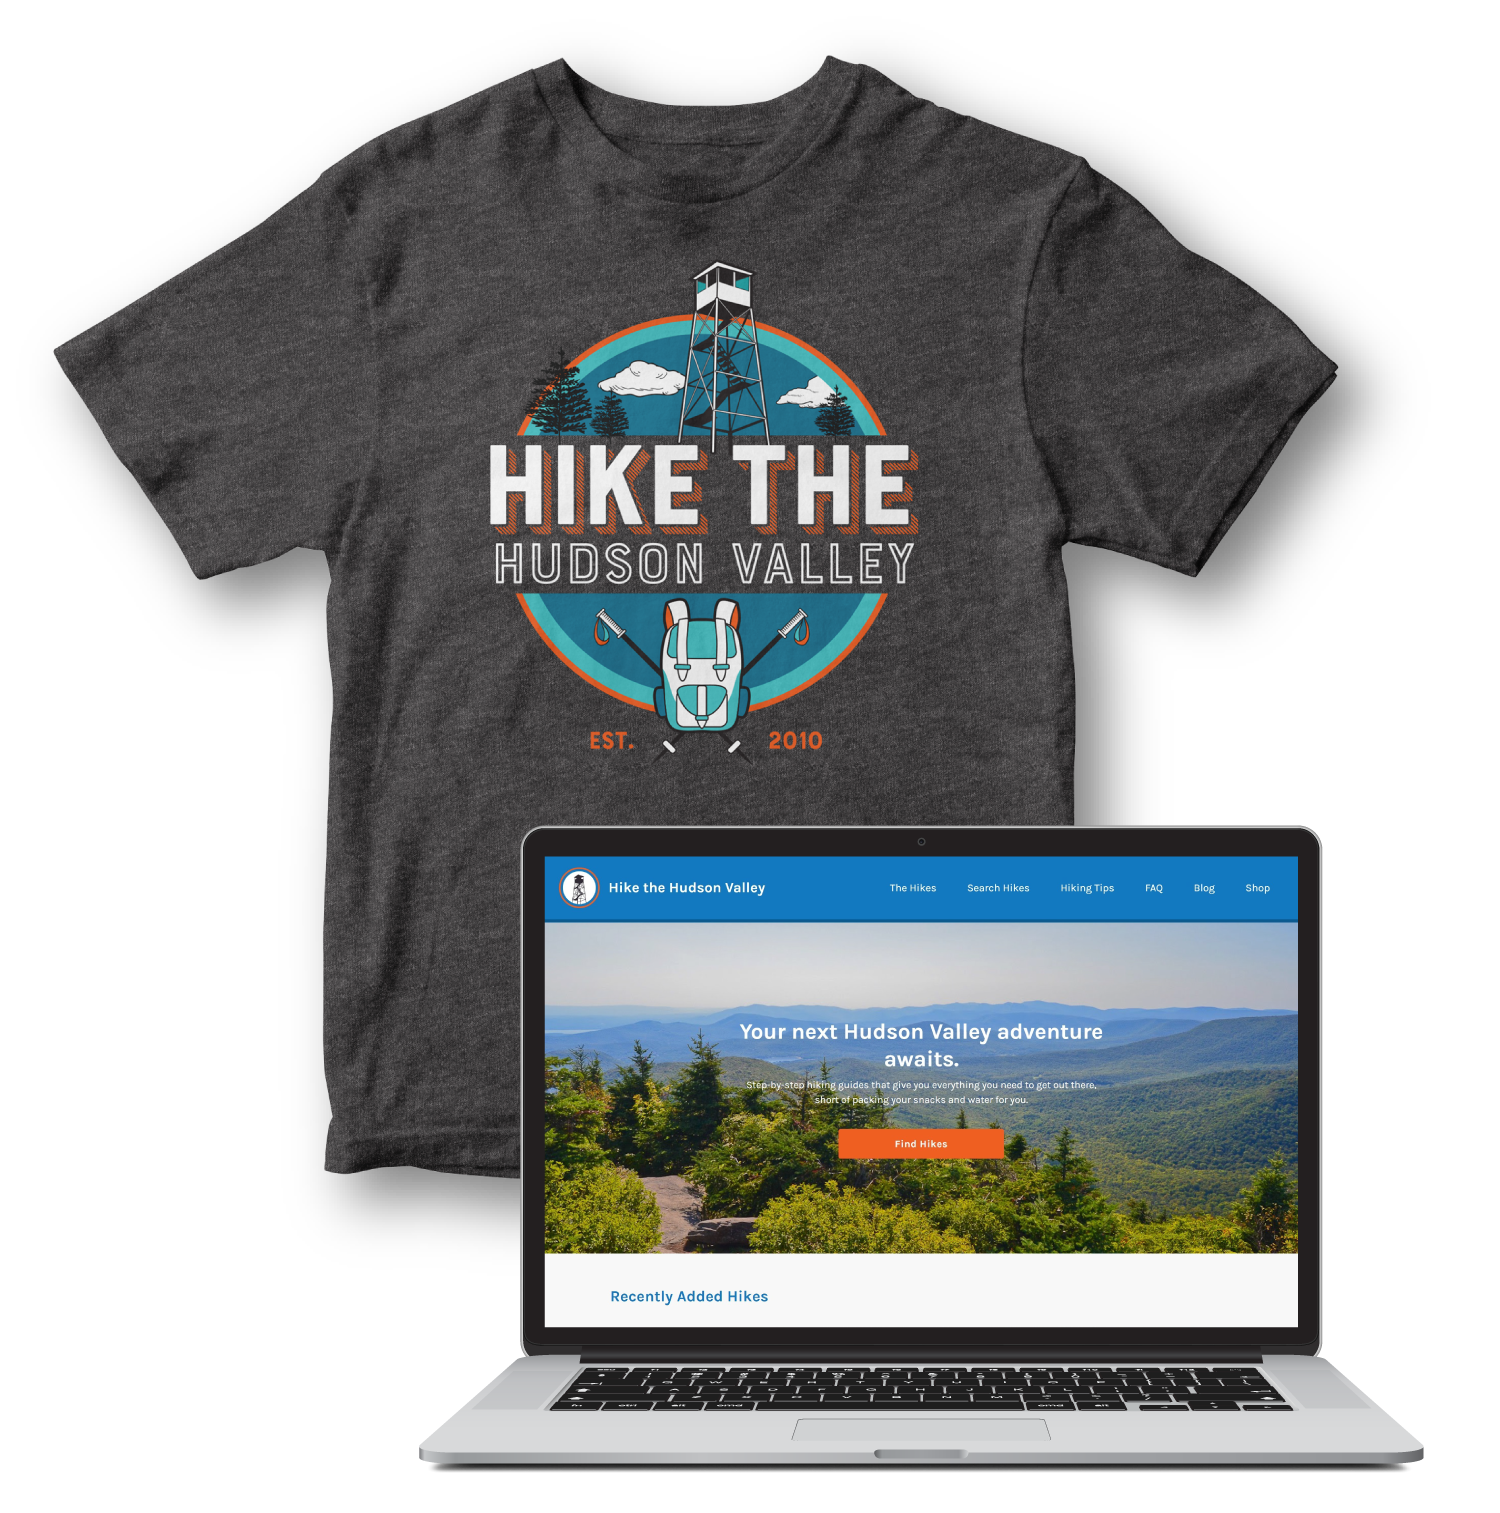 Hike the Hudson Valley tshirt and website